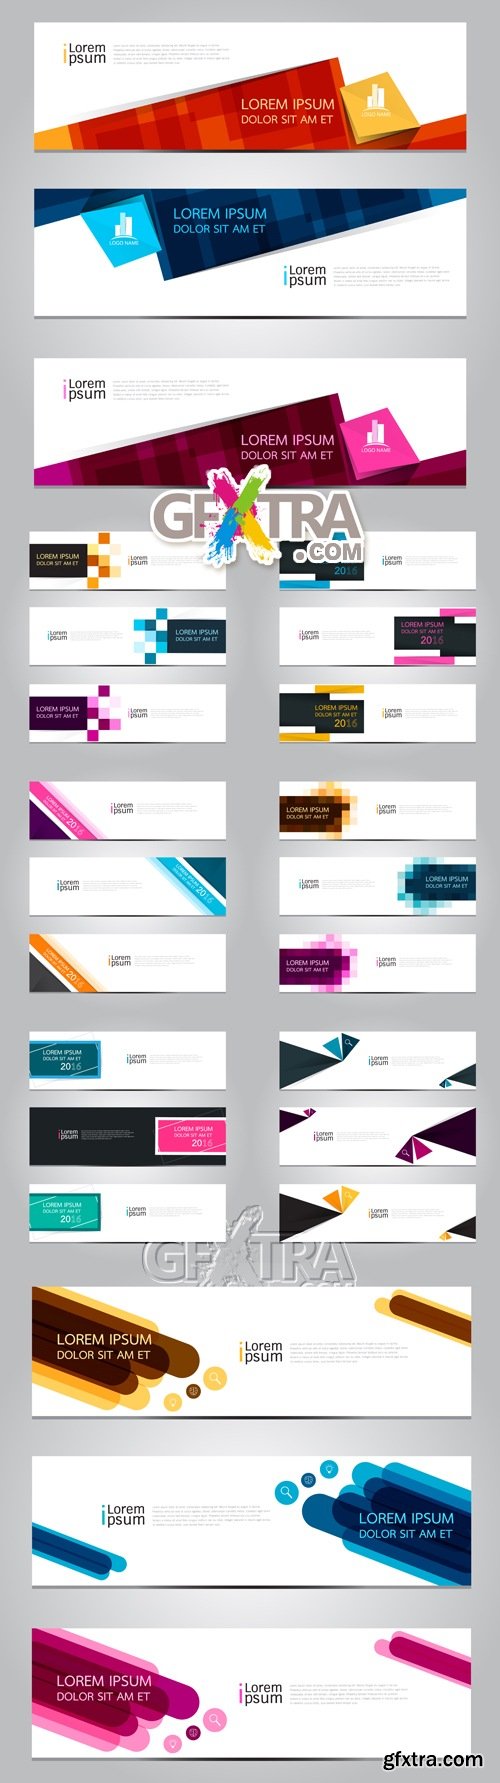 Abstract Business Banners Vector